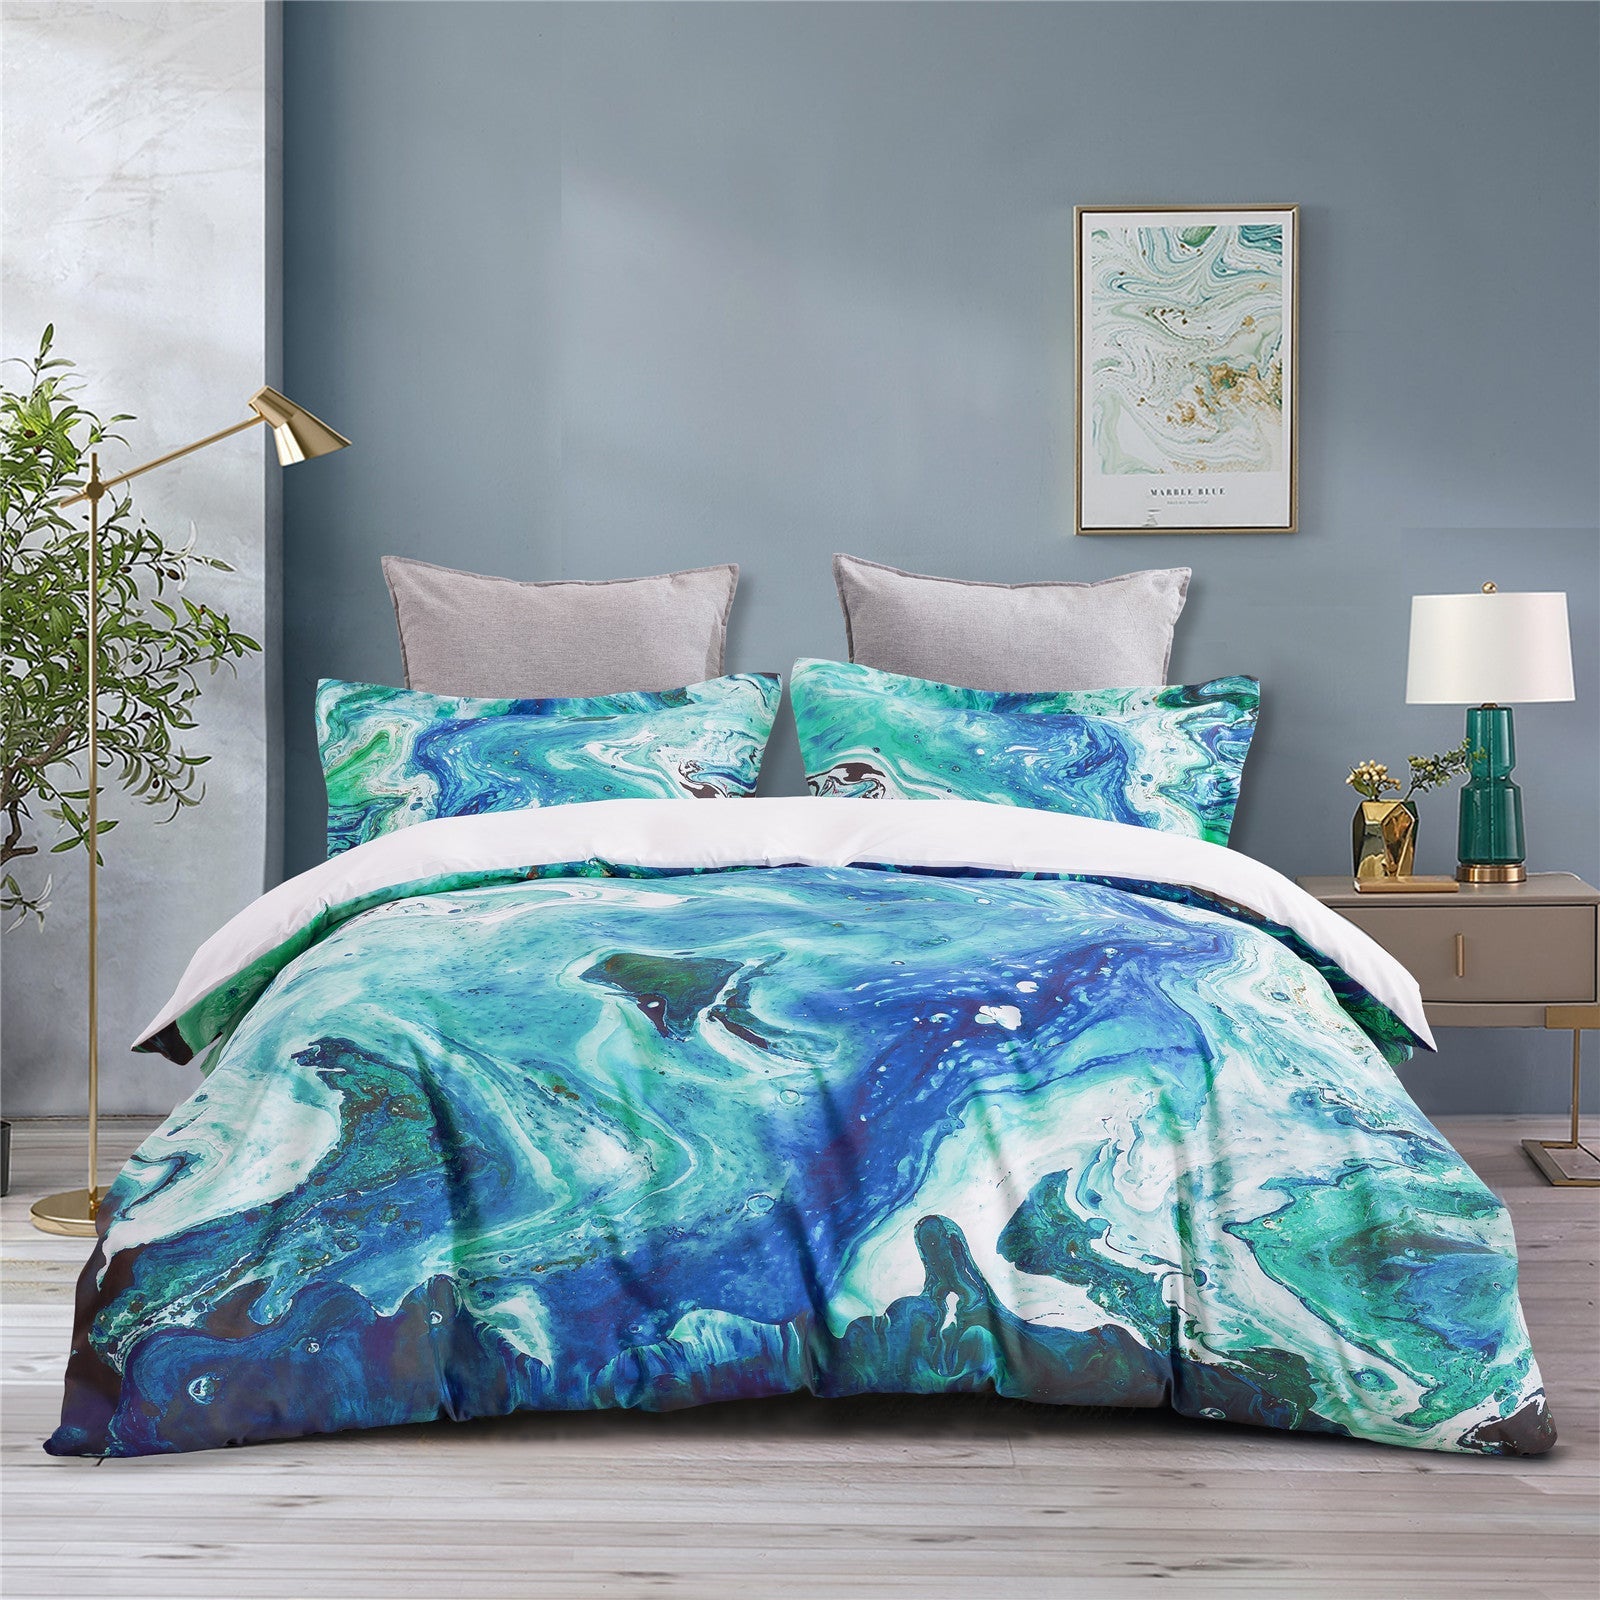 Marble Moire Quilt Cover Pillowcase Three-Piece Set